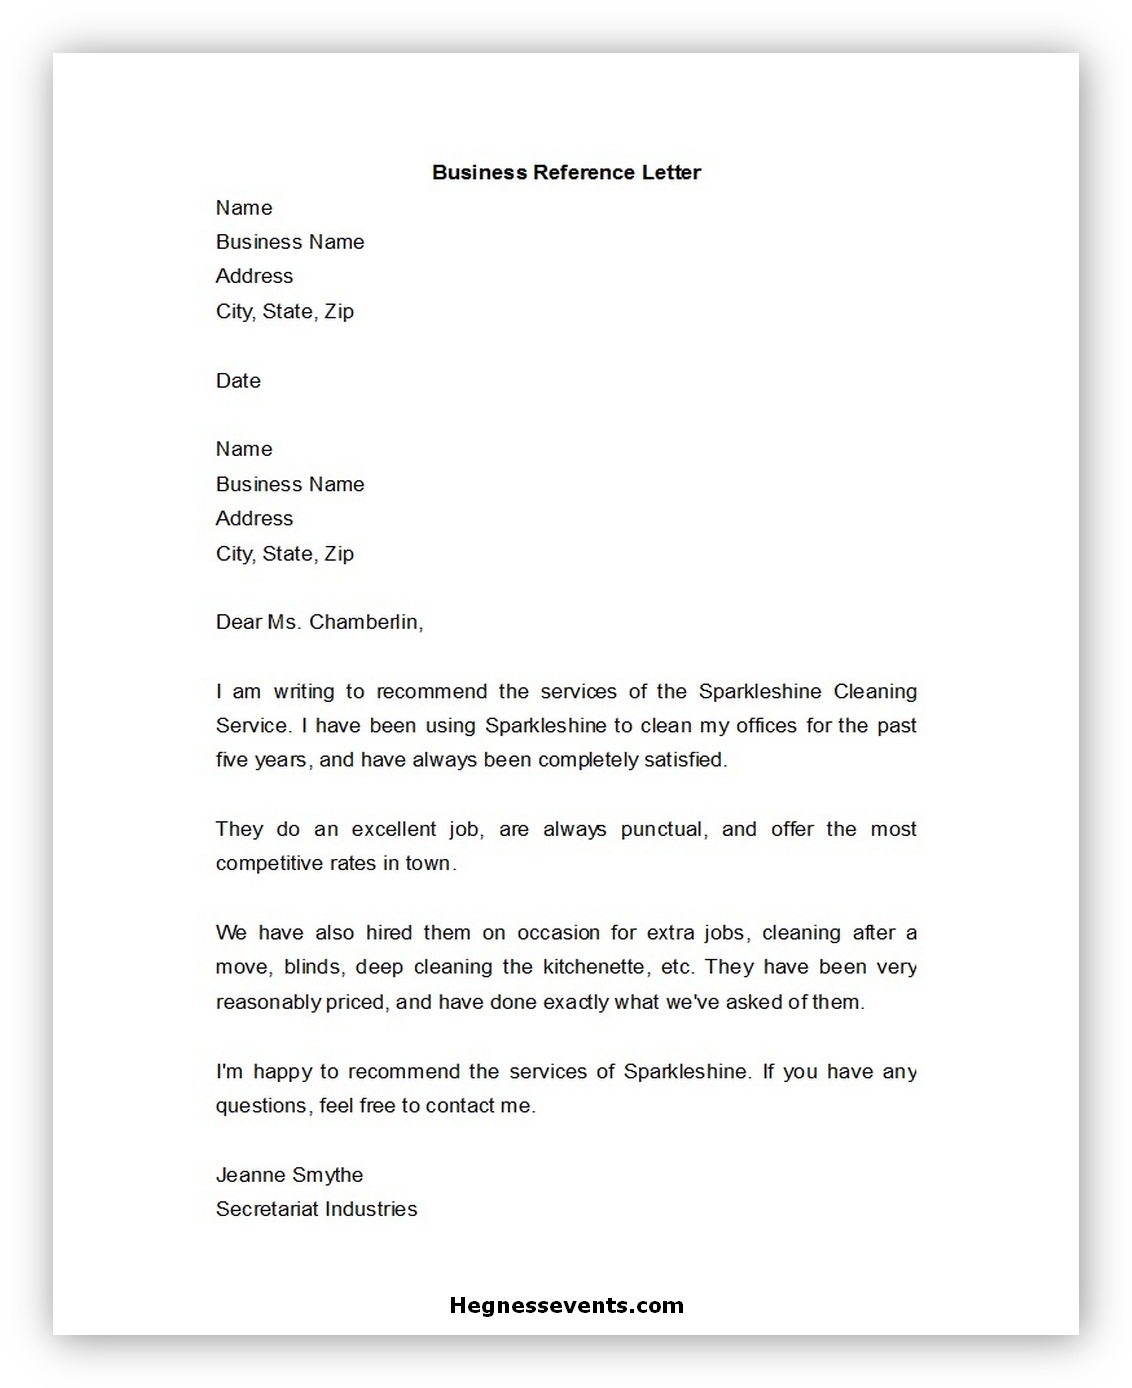 Business reference letter 01